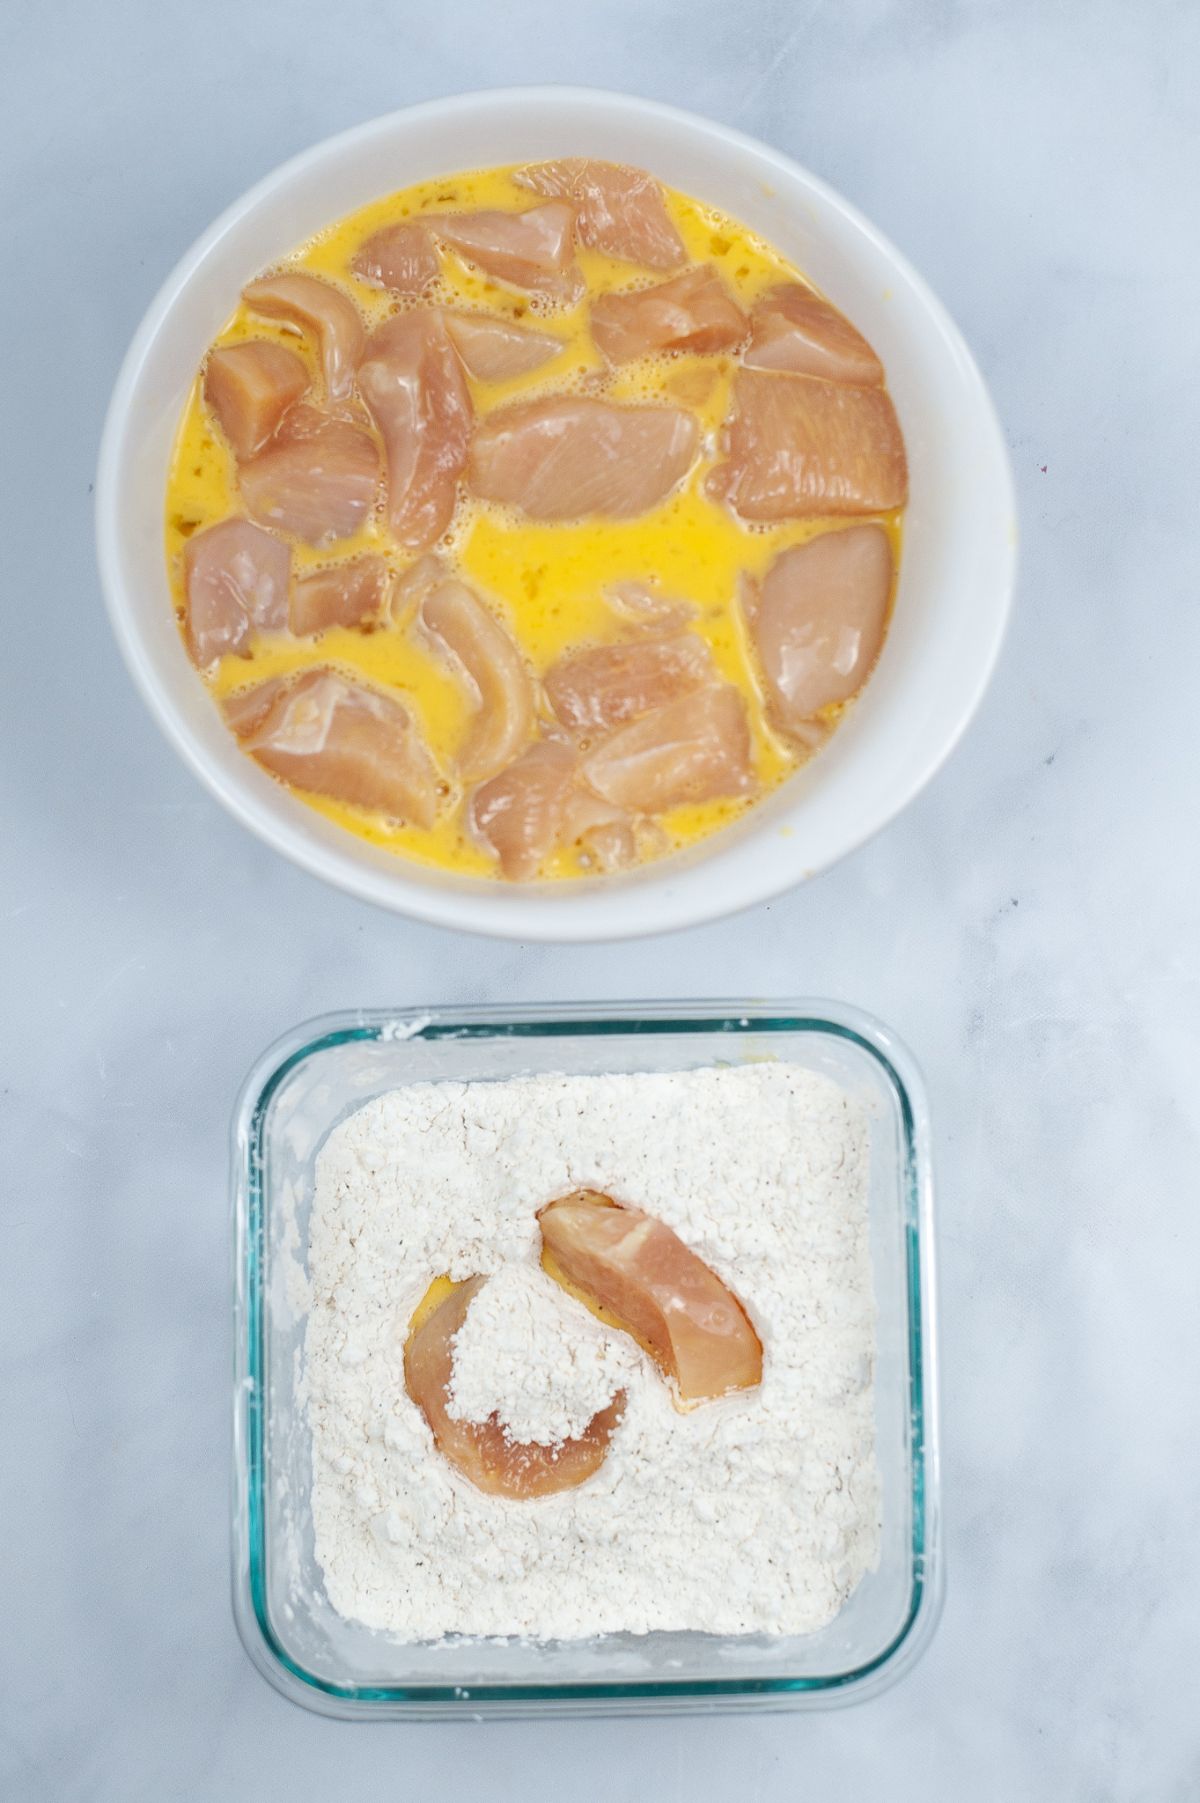 raw chicken in a bowl of eggs next to a glass dish with raw chicken being coated in flour